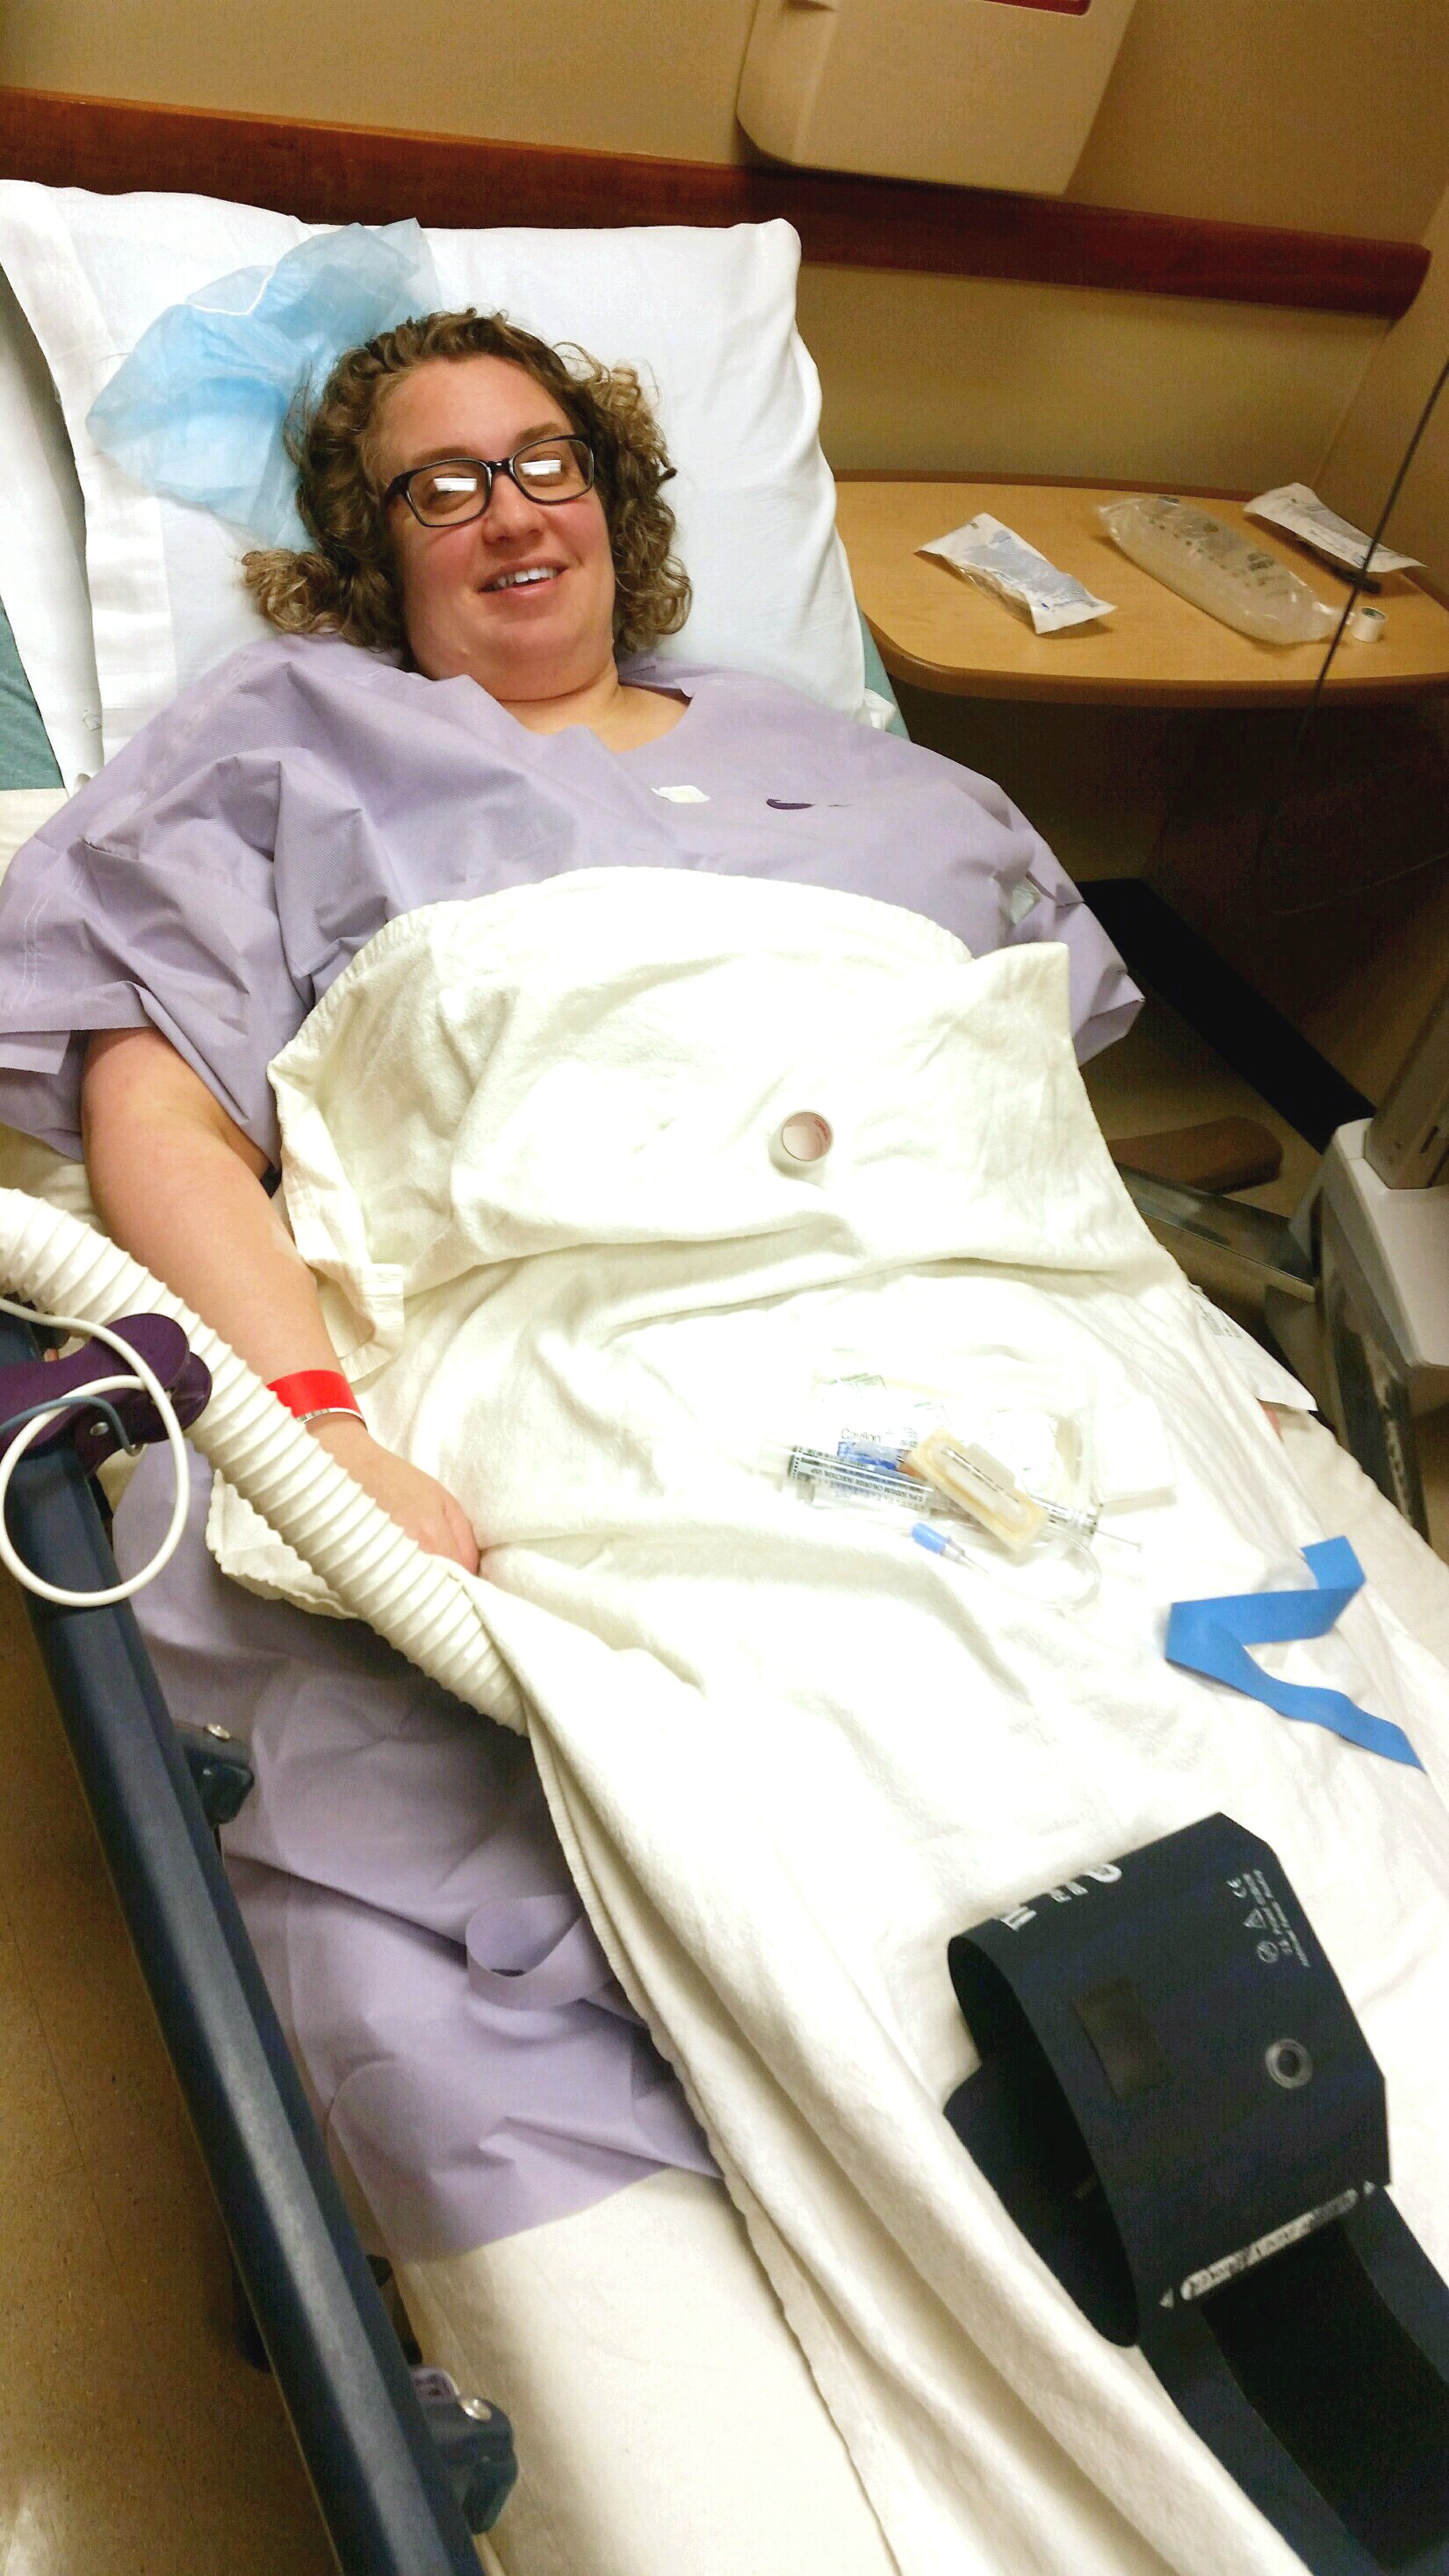 Deep Excision and Hysterectomy Surgery Day